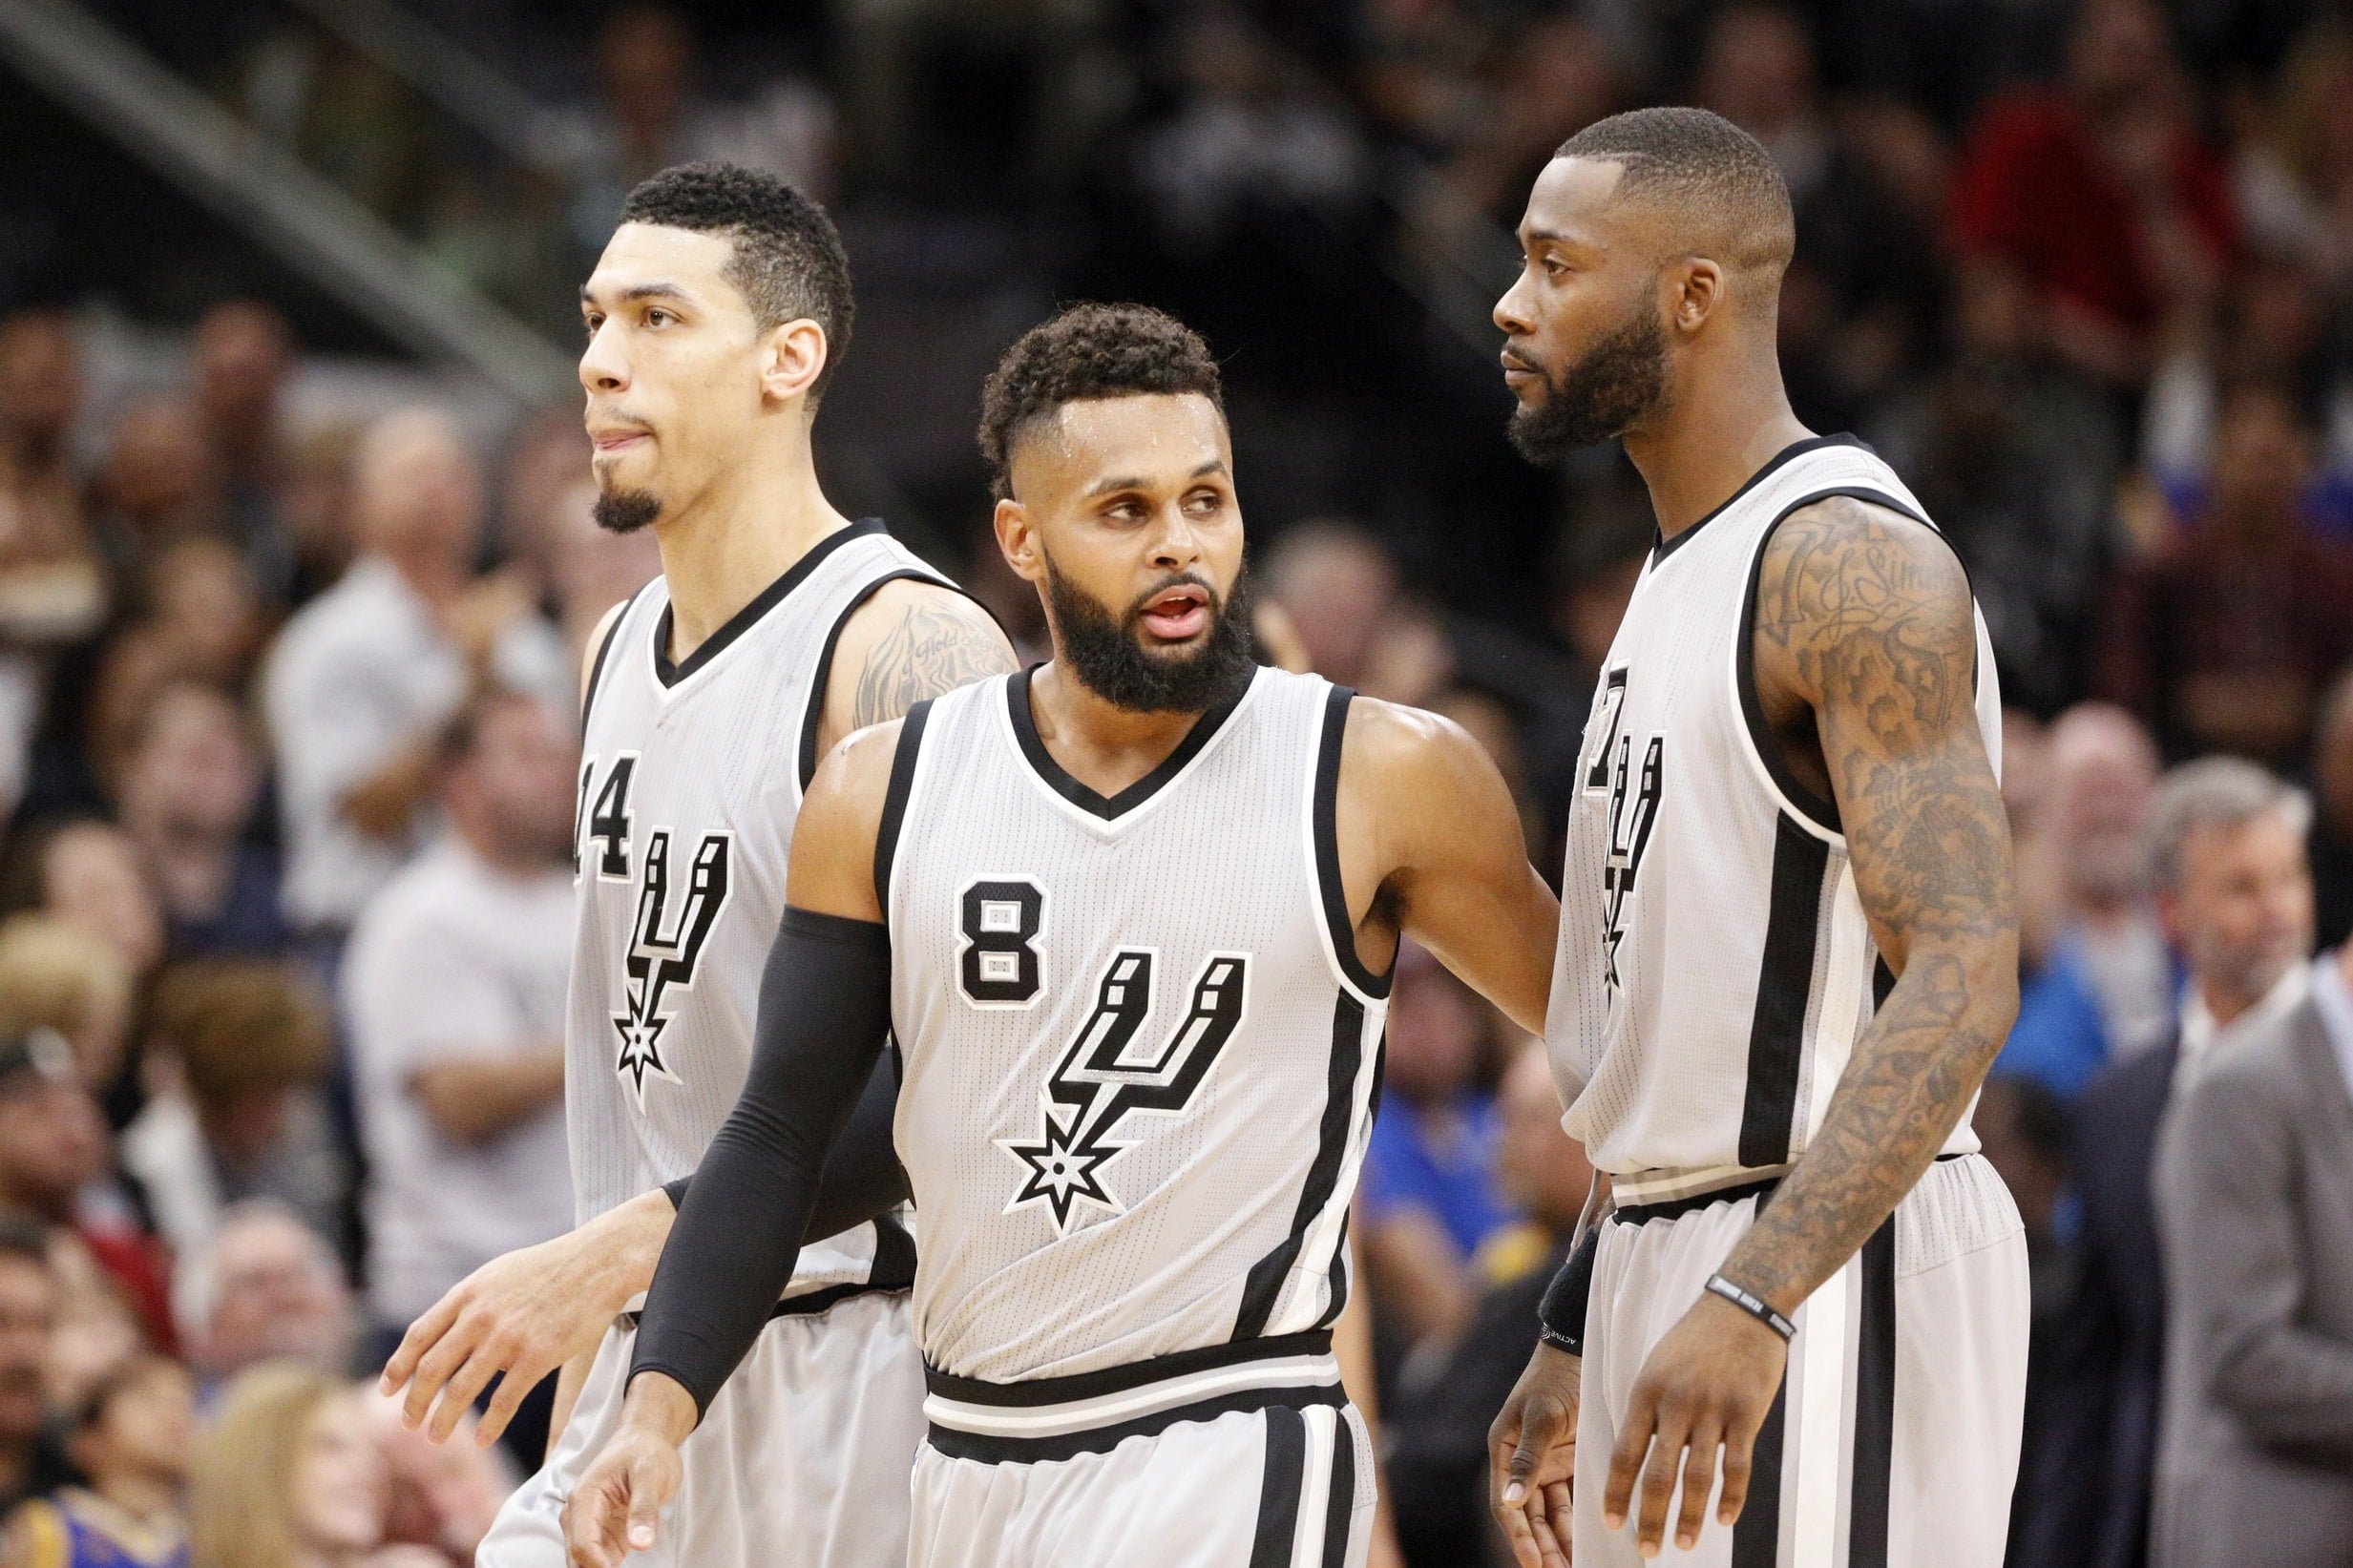 Mar 11, 2017; San Antonio, TX, USA; San Antonio Spurs point guard Patty Mills (8) is congratulated by teammates after a basket during the first half against the Golden State Warriors at AT&T Center. Mandatory Credit: Soobum Im-USA TODAY Sports